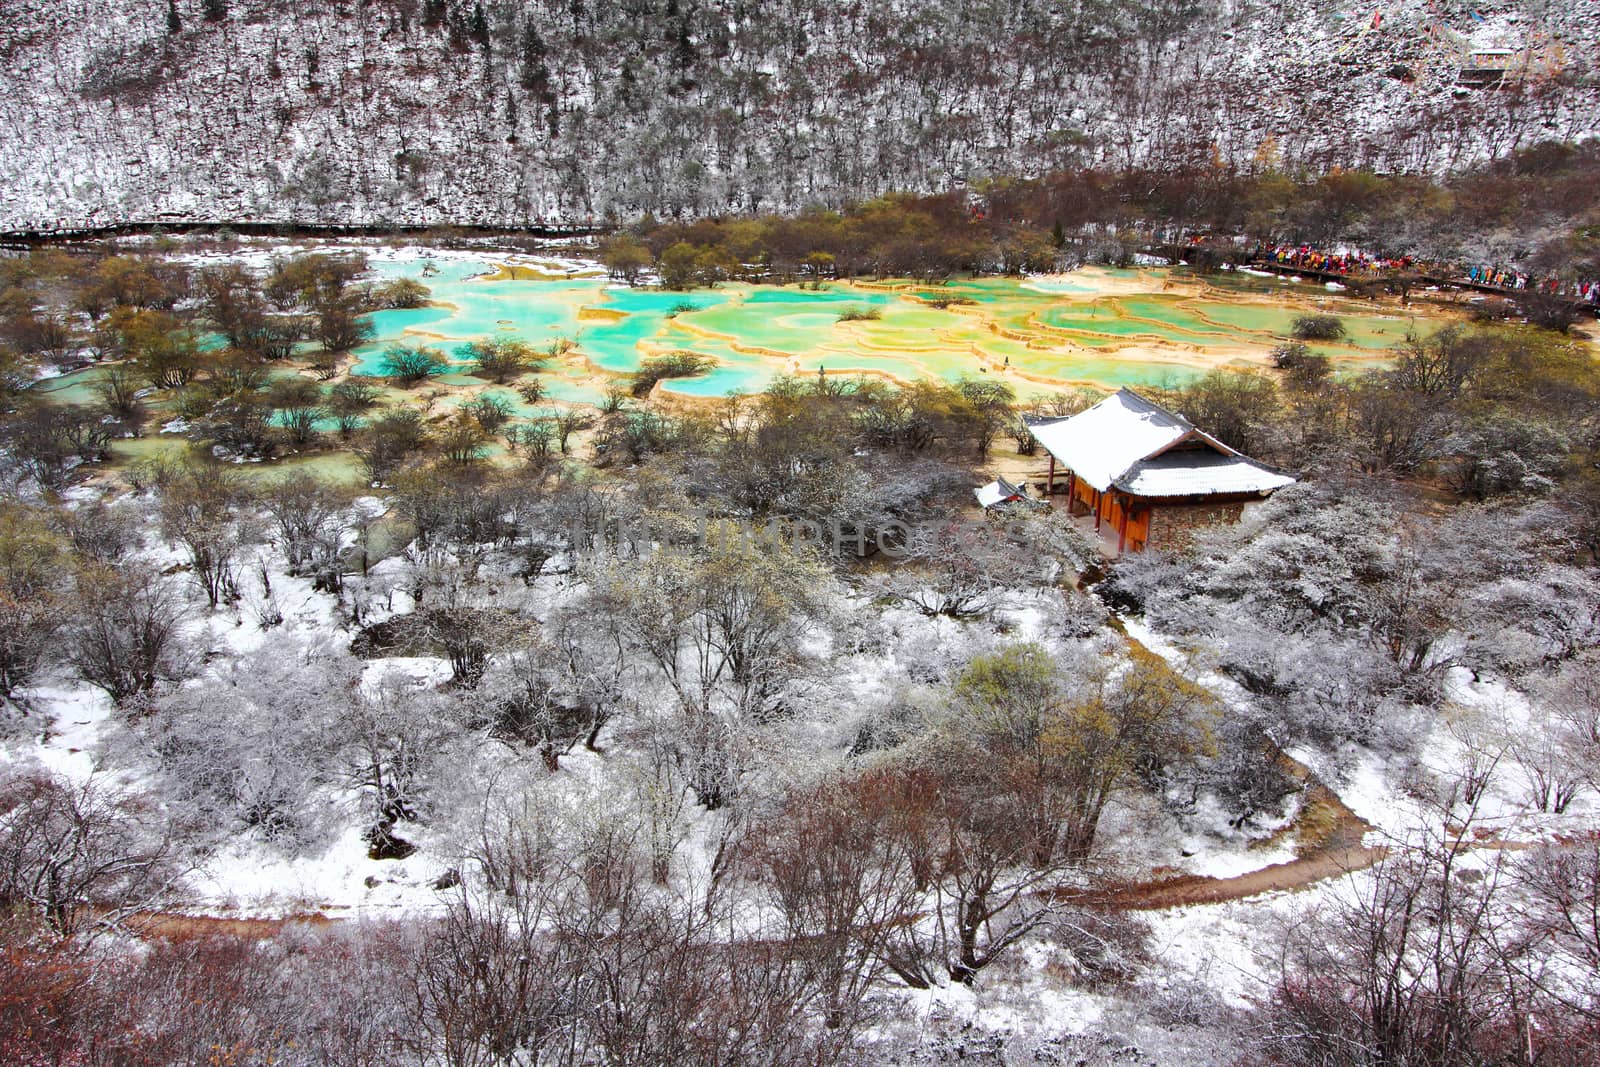 Huanglong Top Area green pond in winter snow season, Sichuan, China